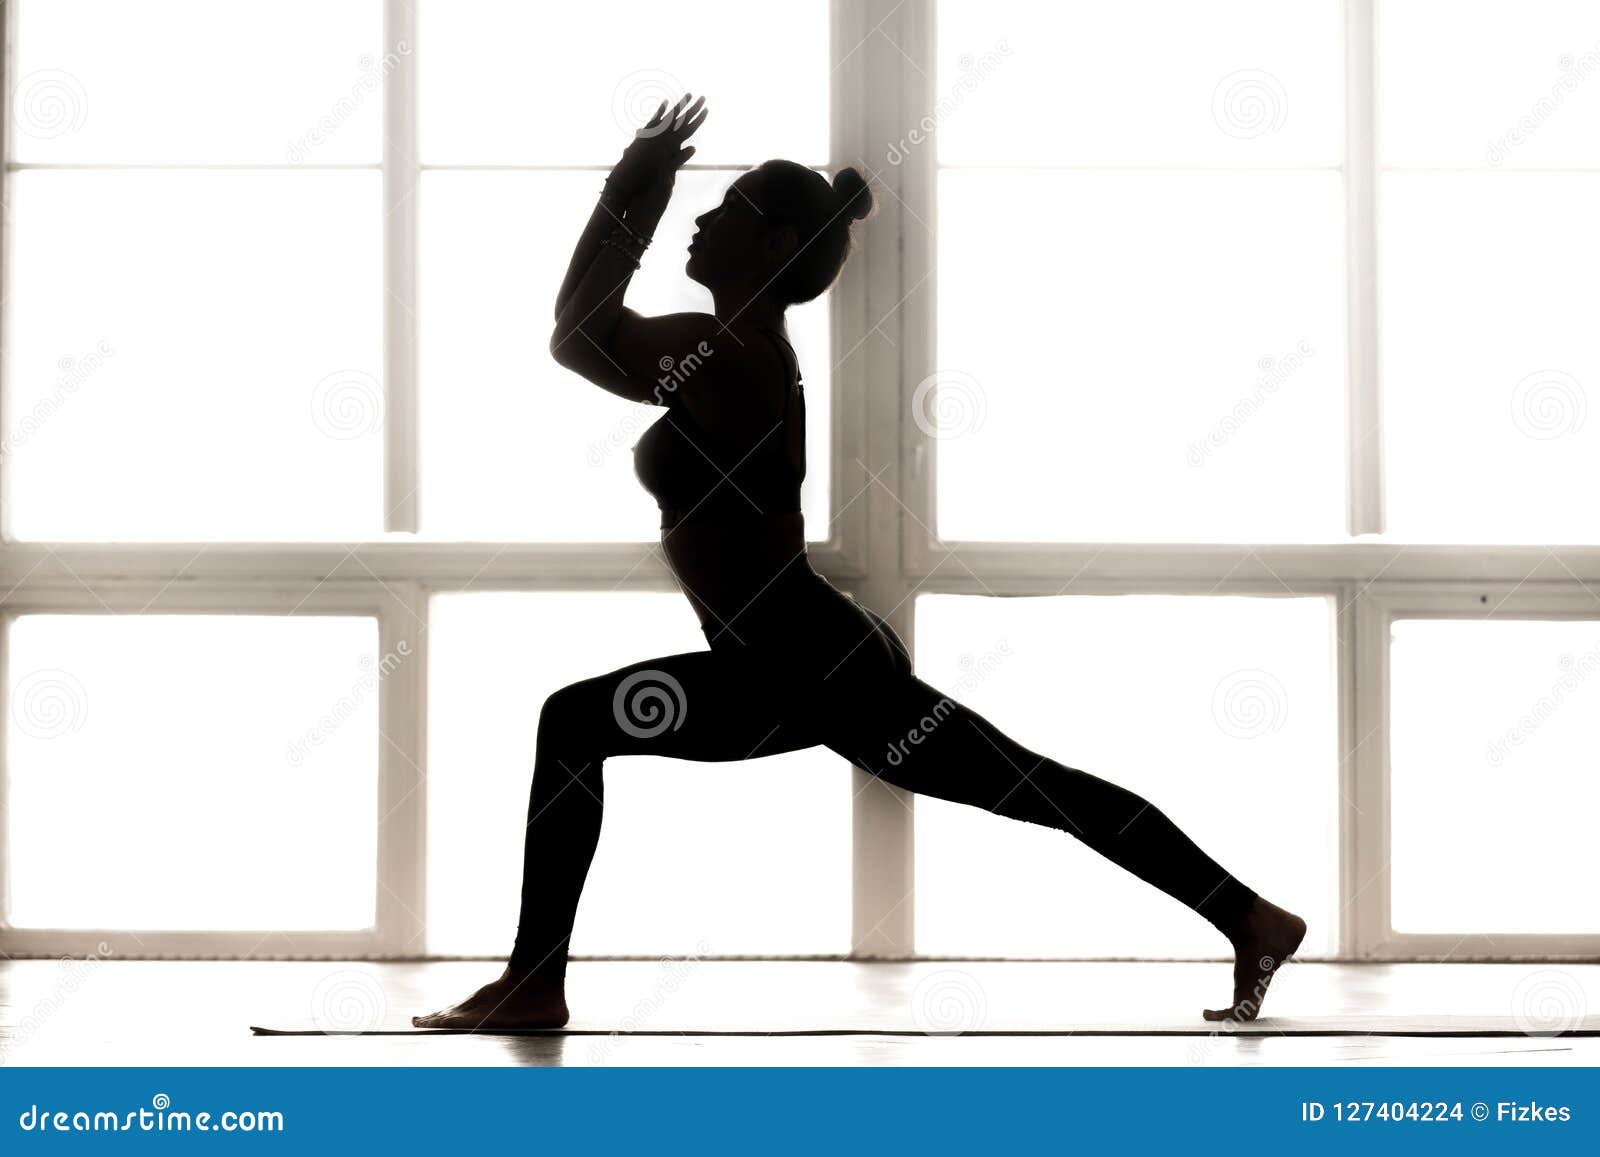 Young Sporty Attractive Woman Practicing Yoga, Doing 